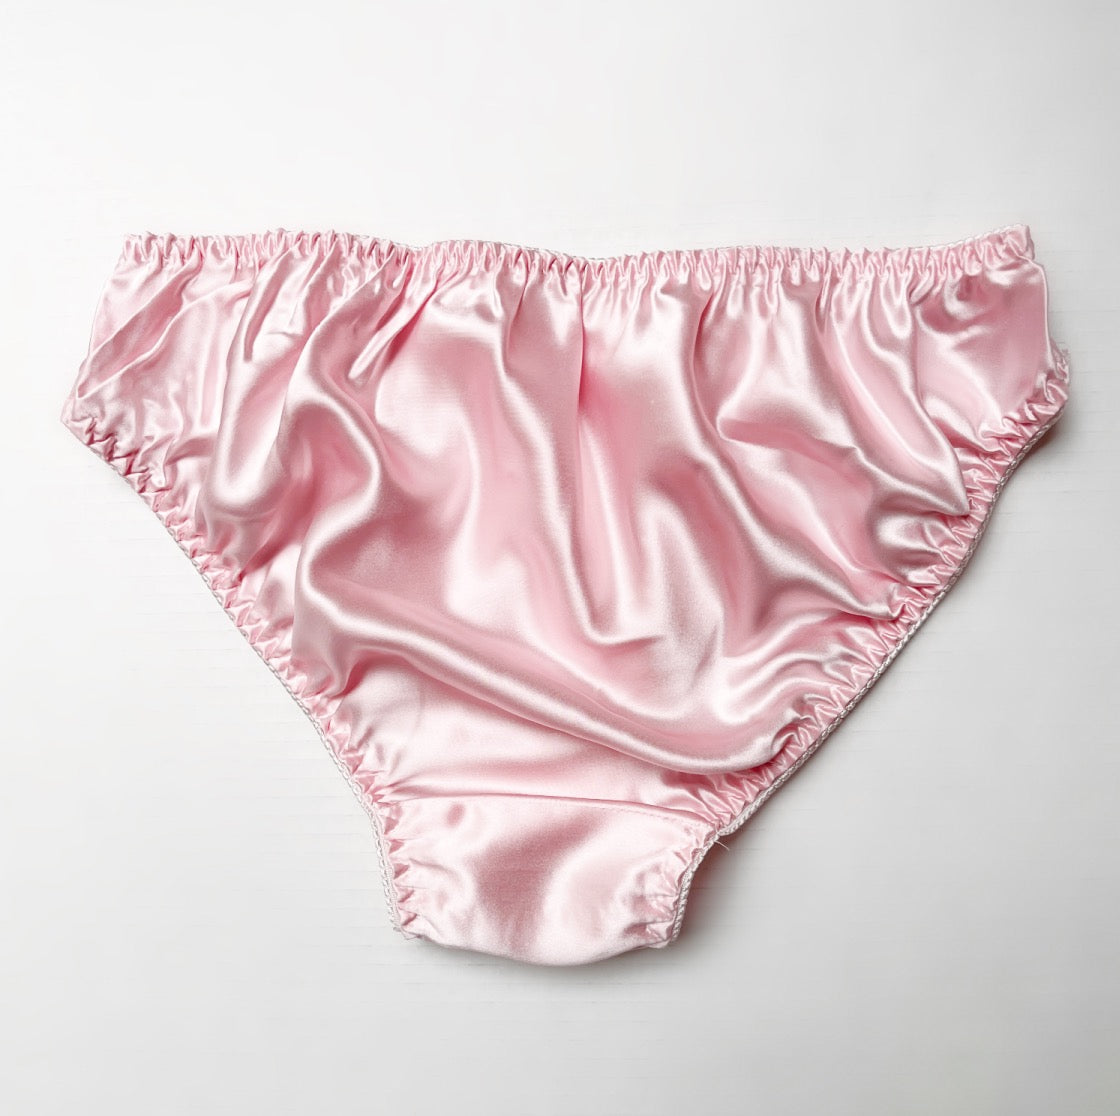 Shayam Seemless penty for Woman's Silk Panty Underwear for